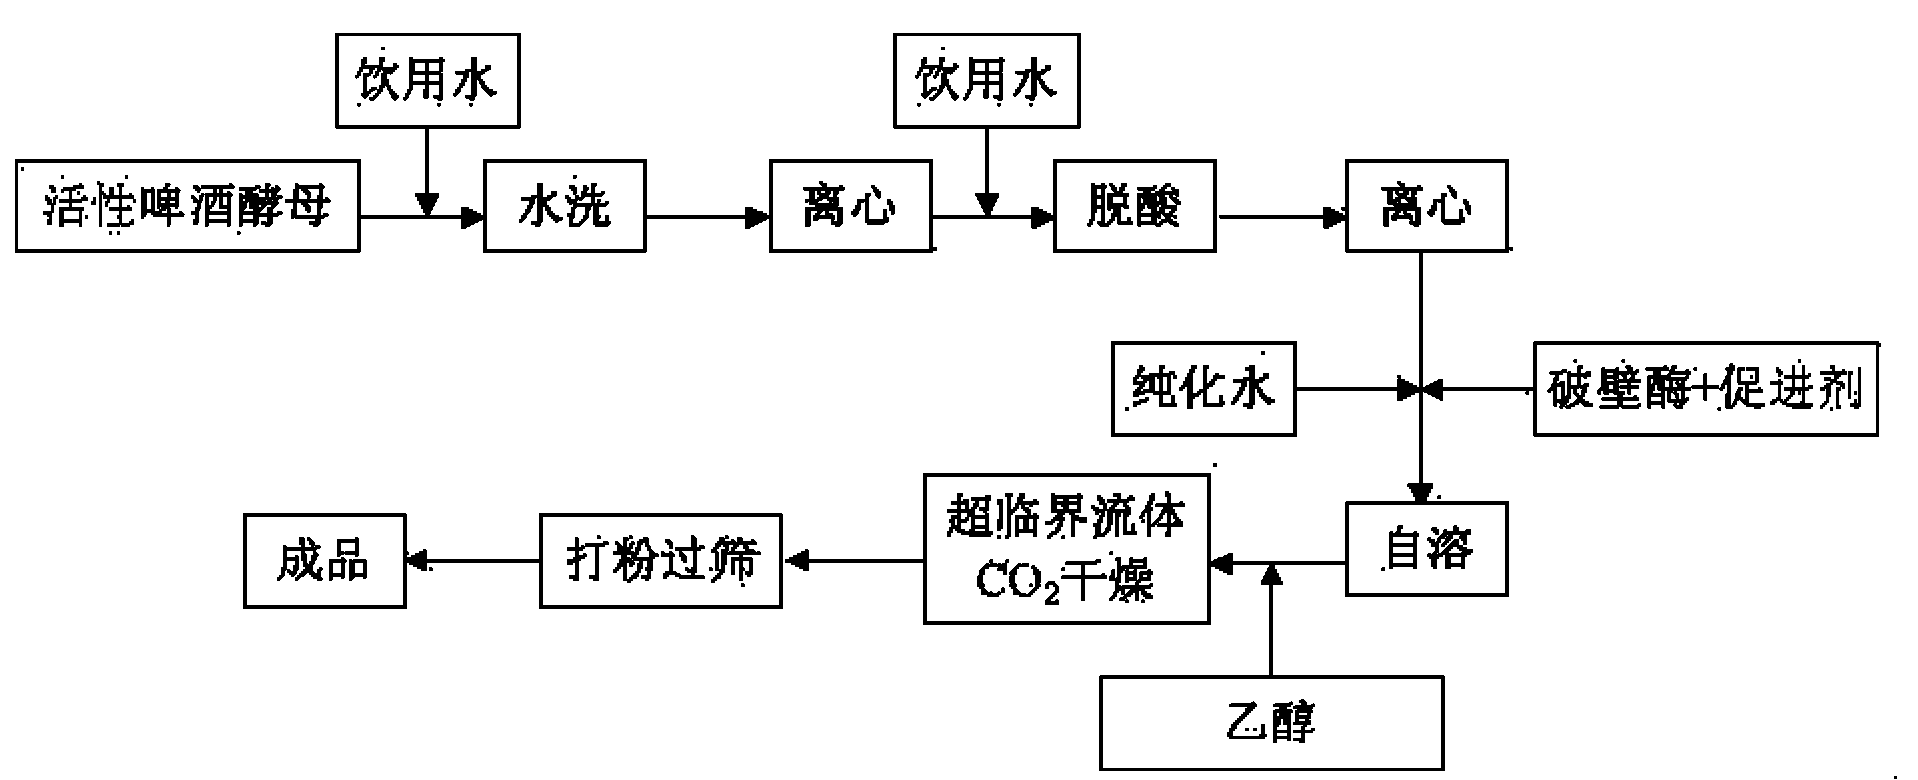 Process for producing medical dried yeast powder